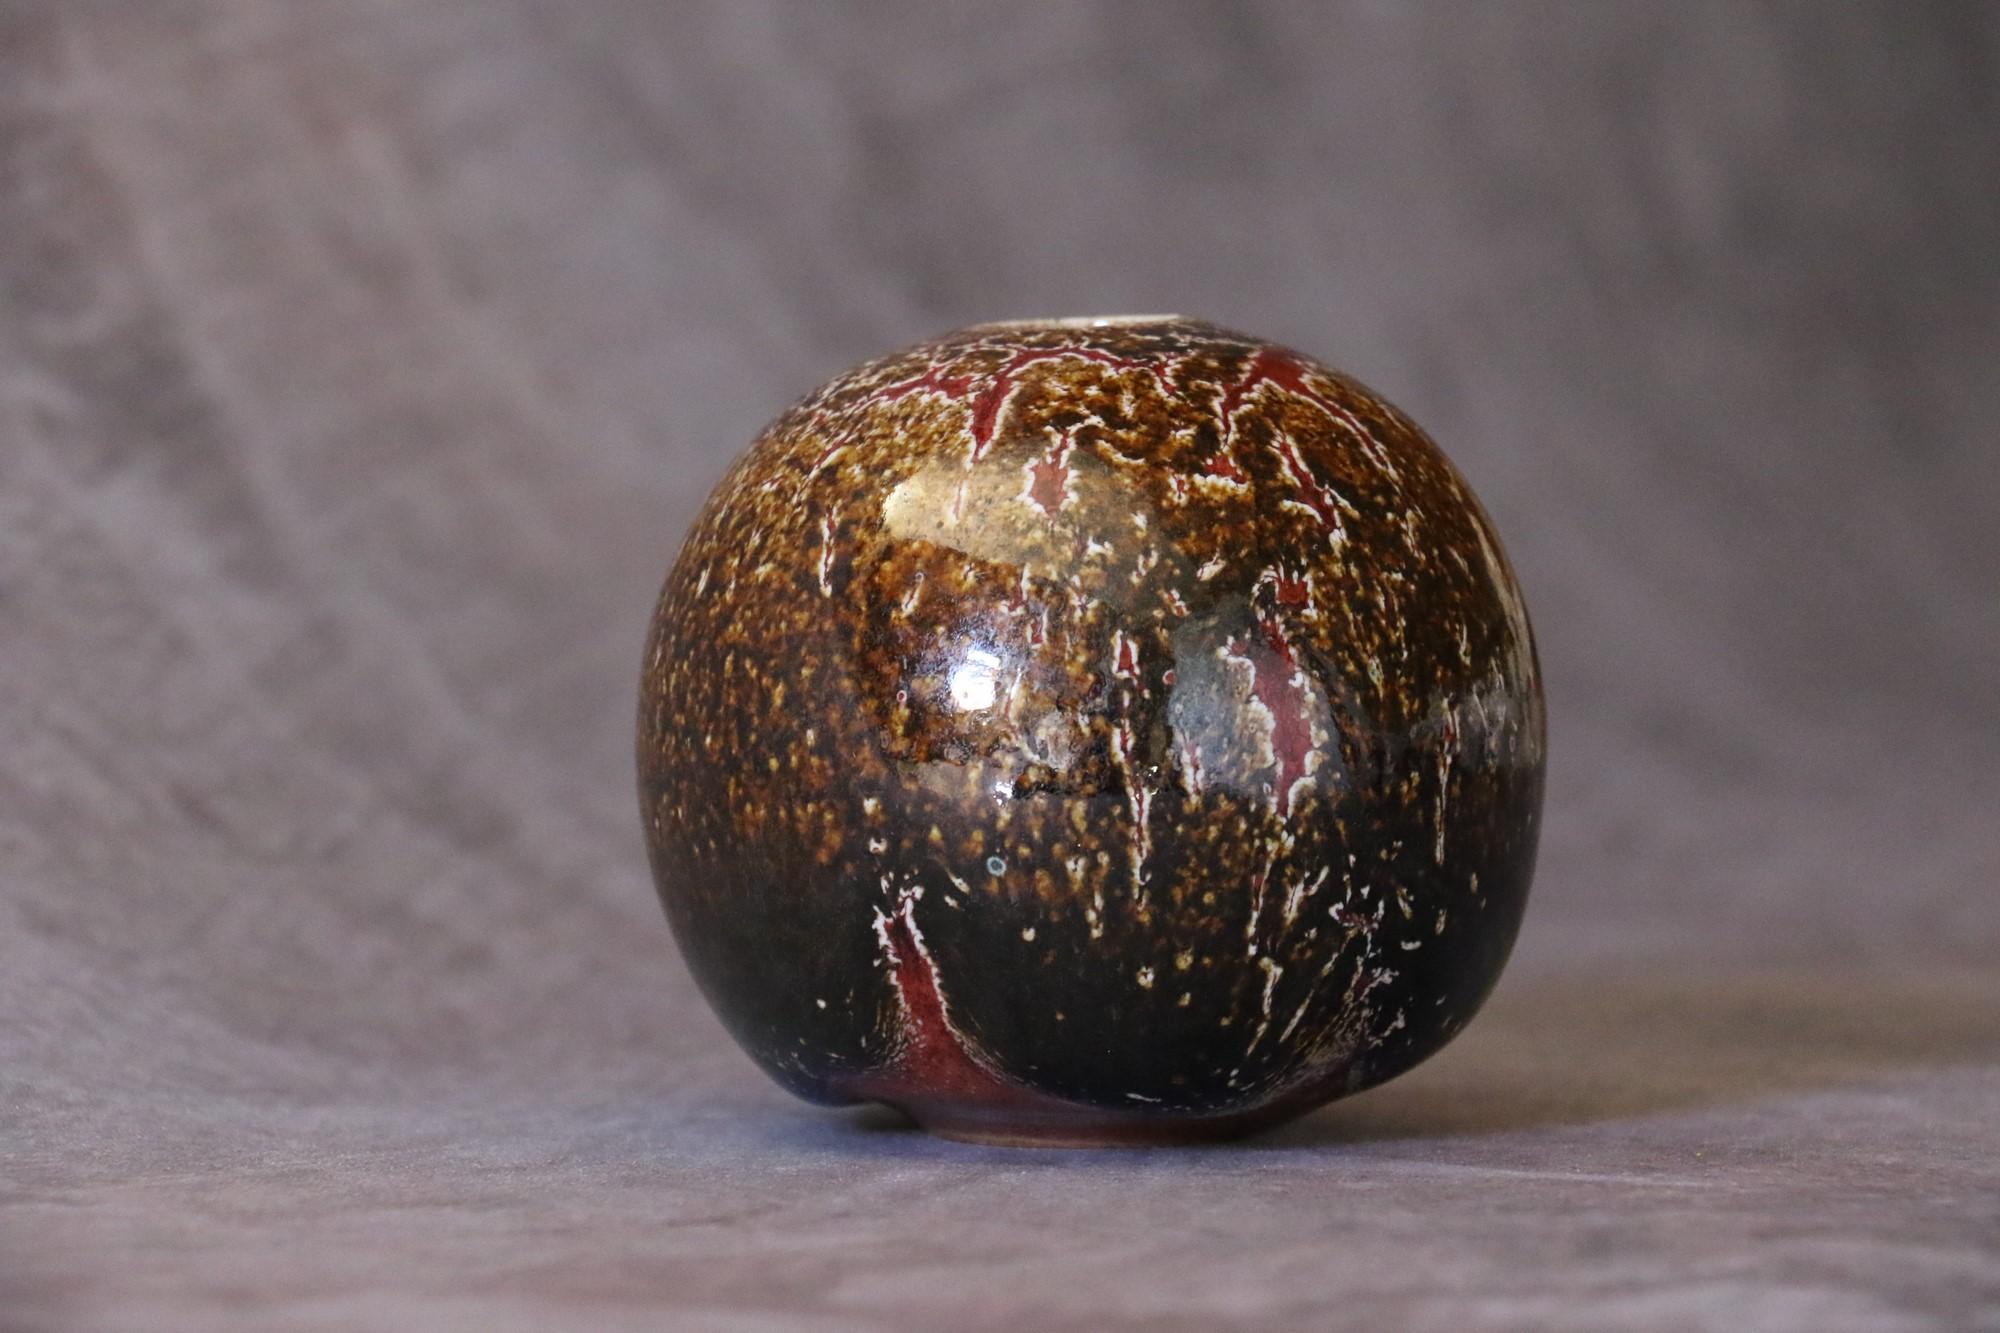 Contemporary French Ceramic Red and Brown Ball Vase by Marc Uzan, circa 2000 For Sale